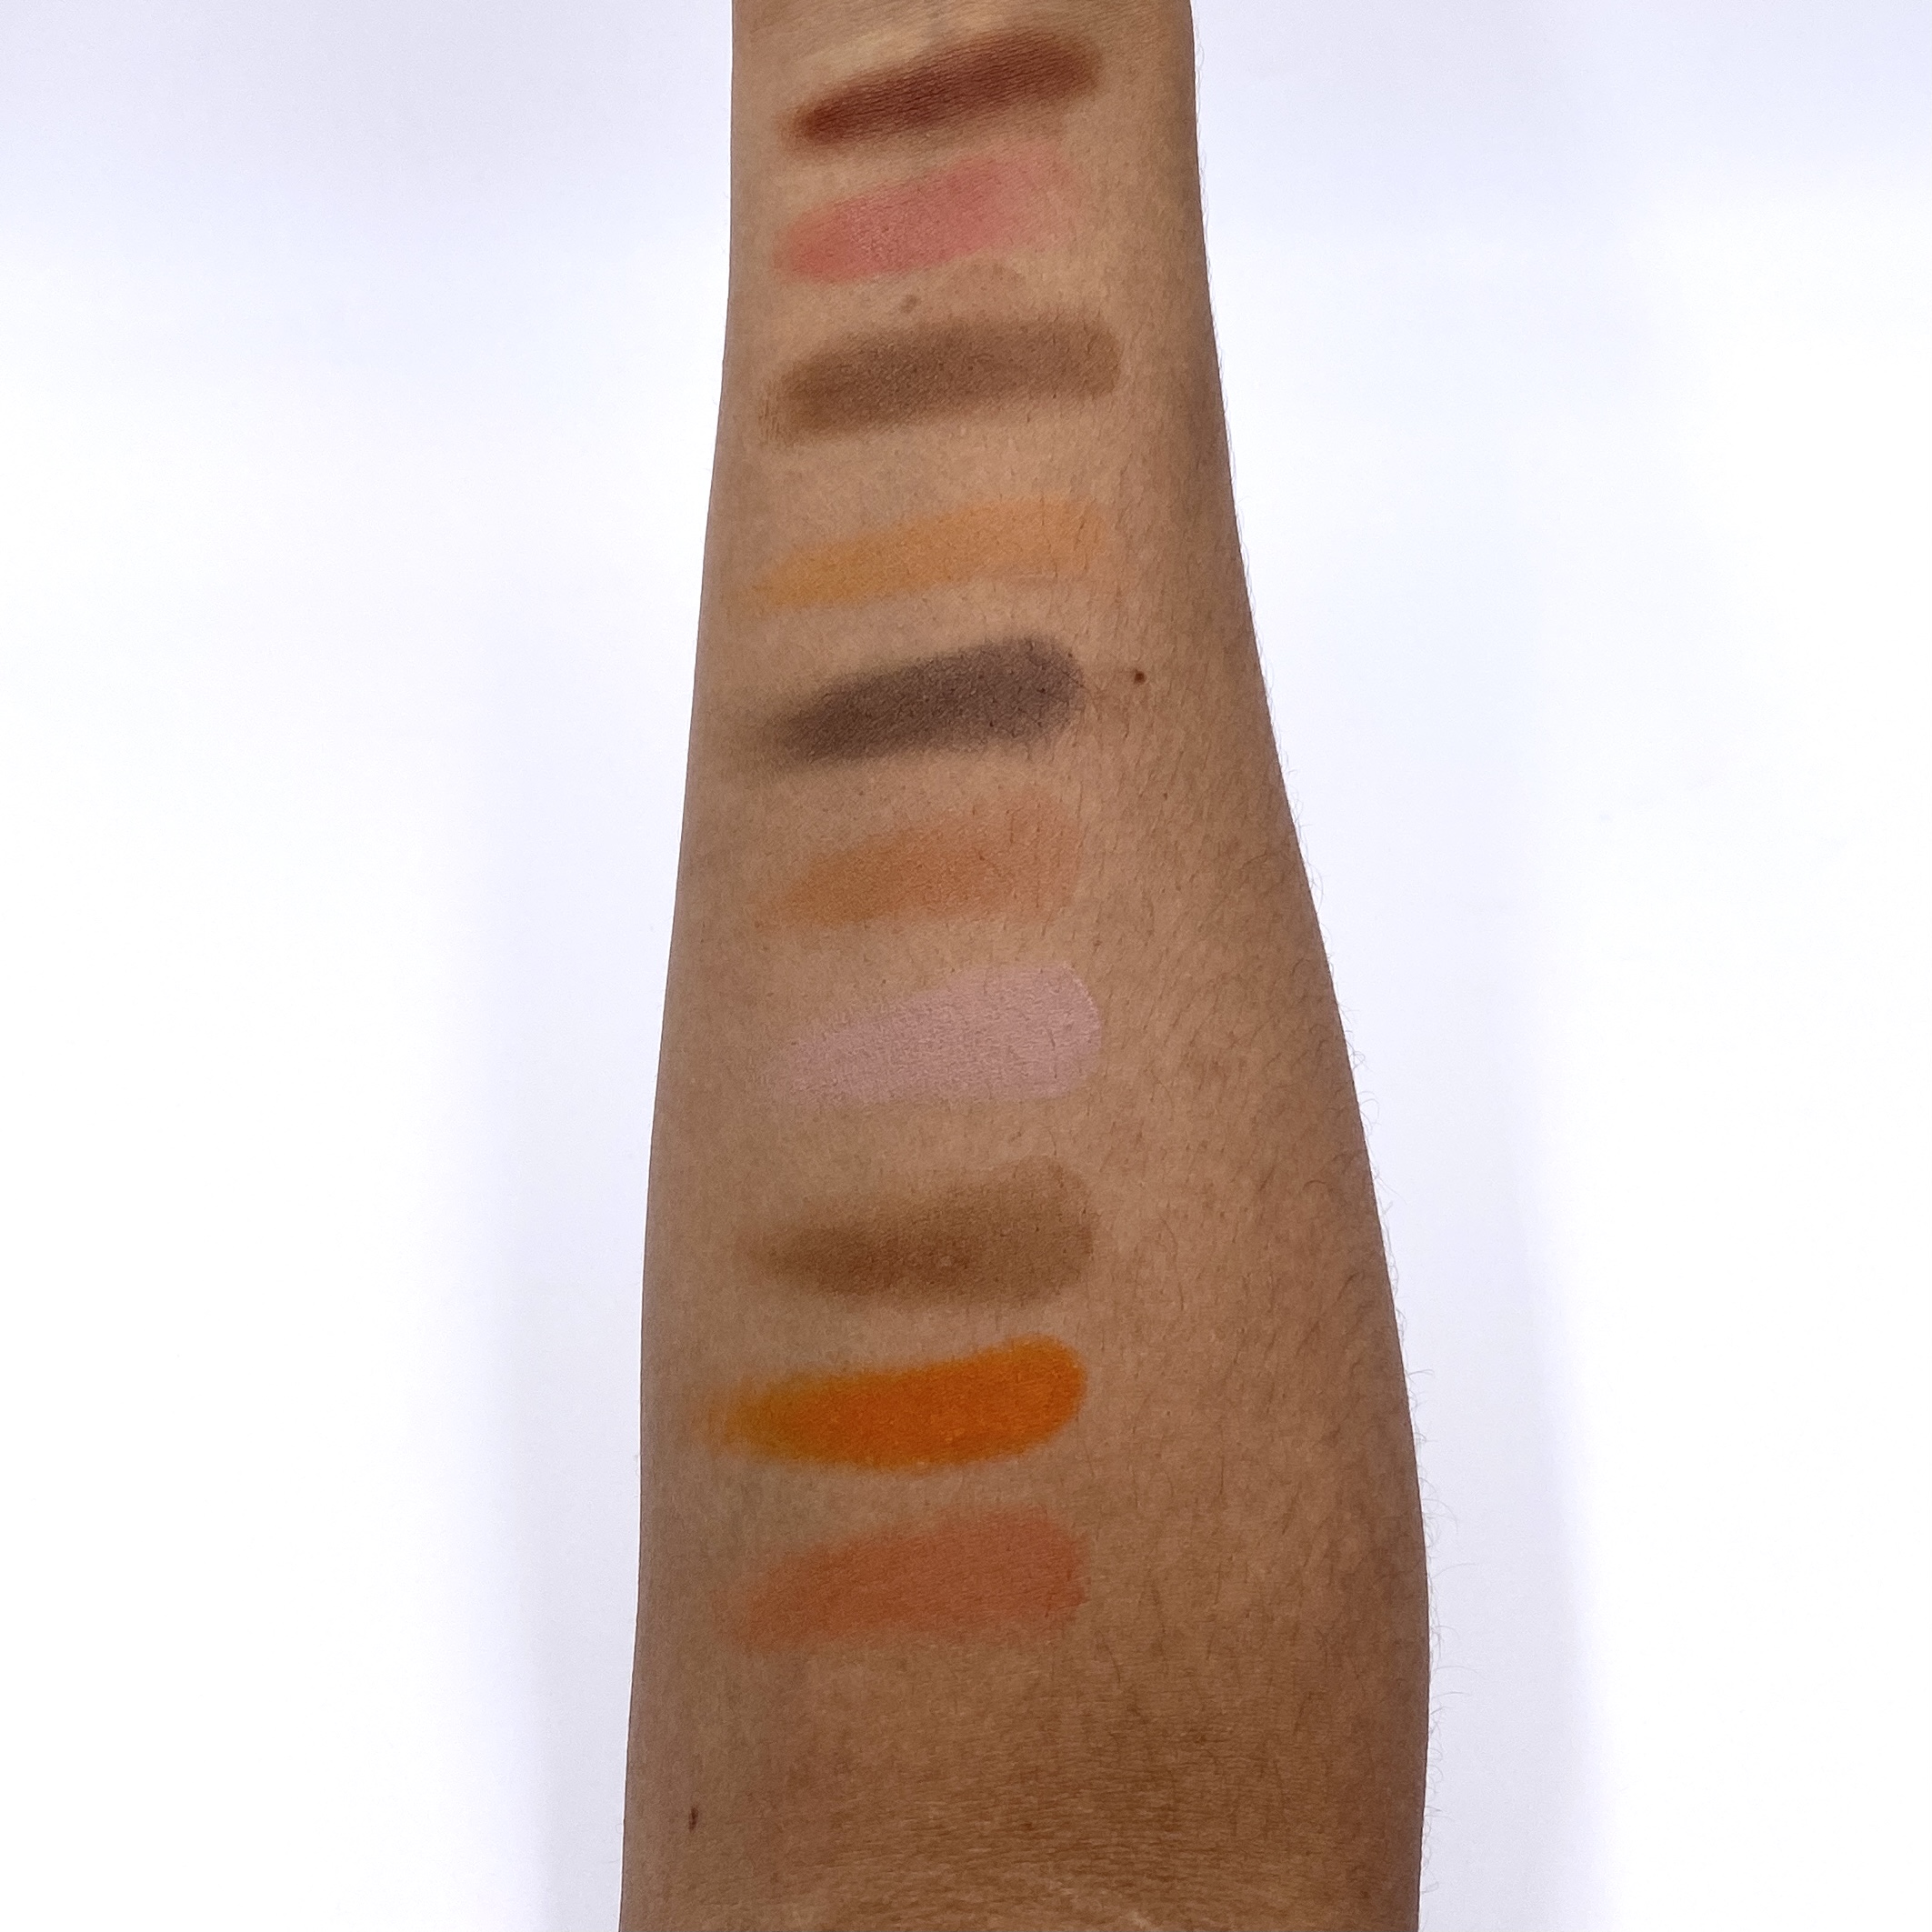 Lipstick Palettes Swatch for Brown Sugar Box February 2021